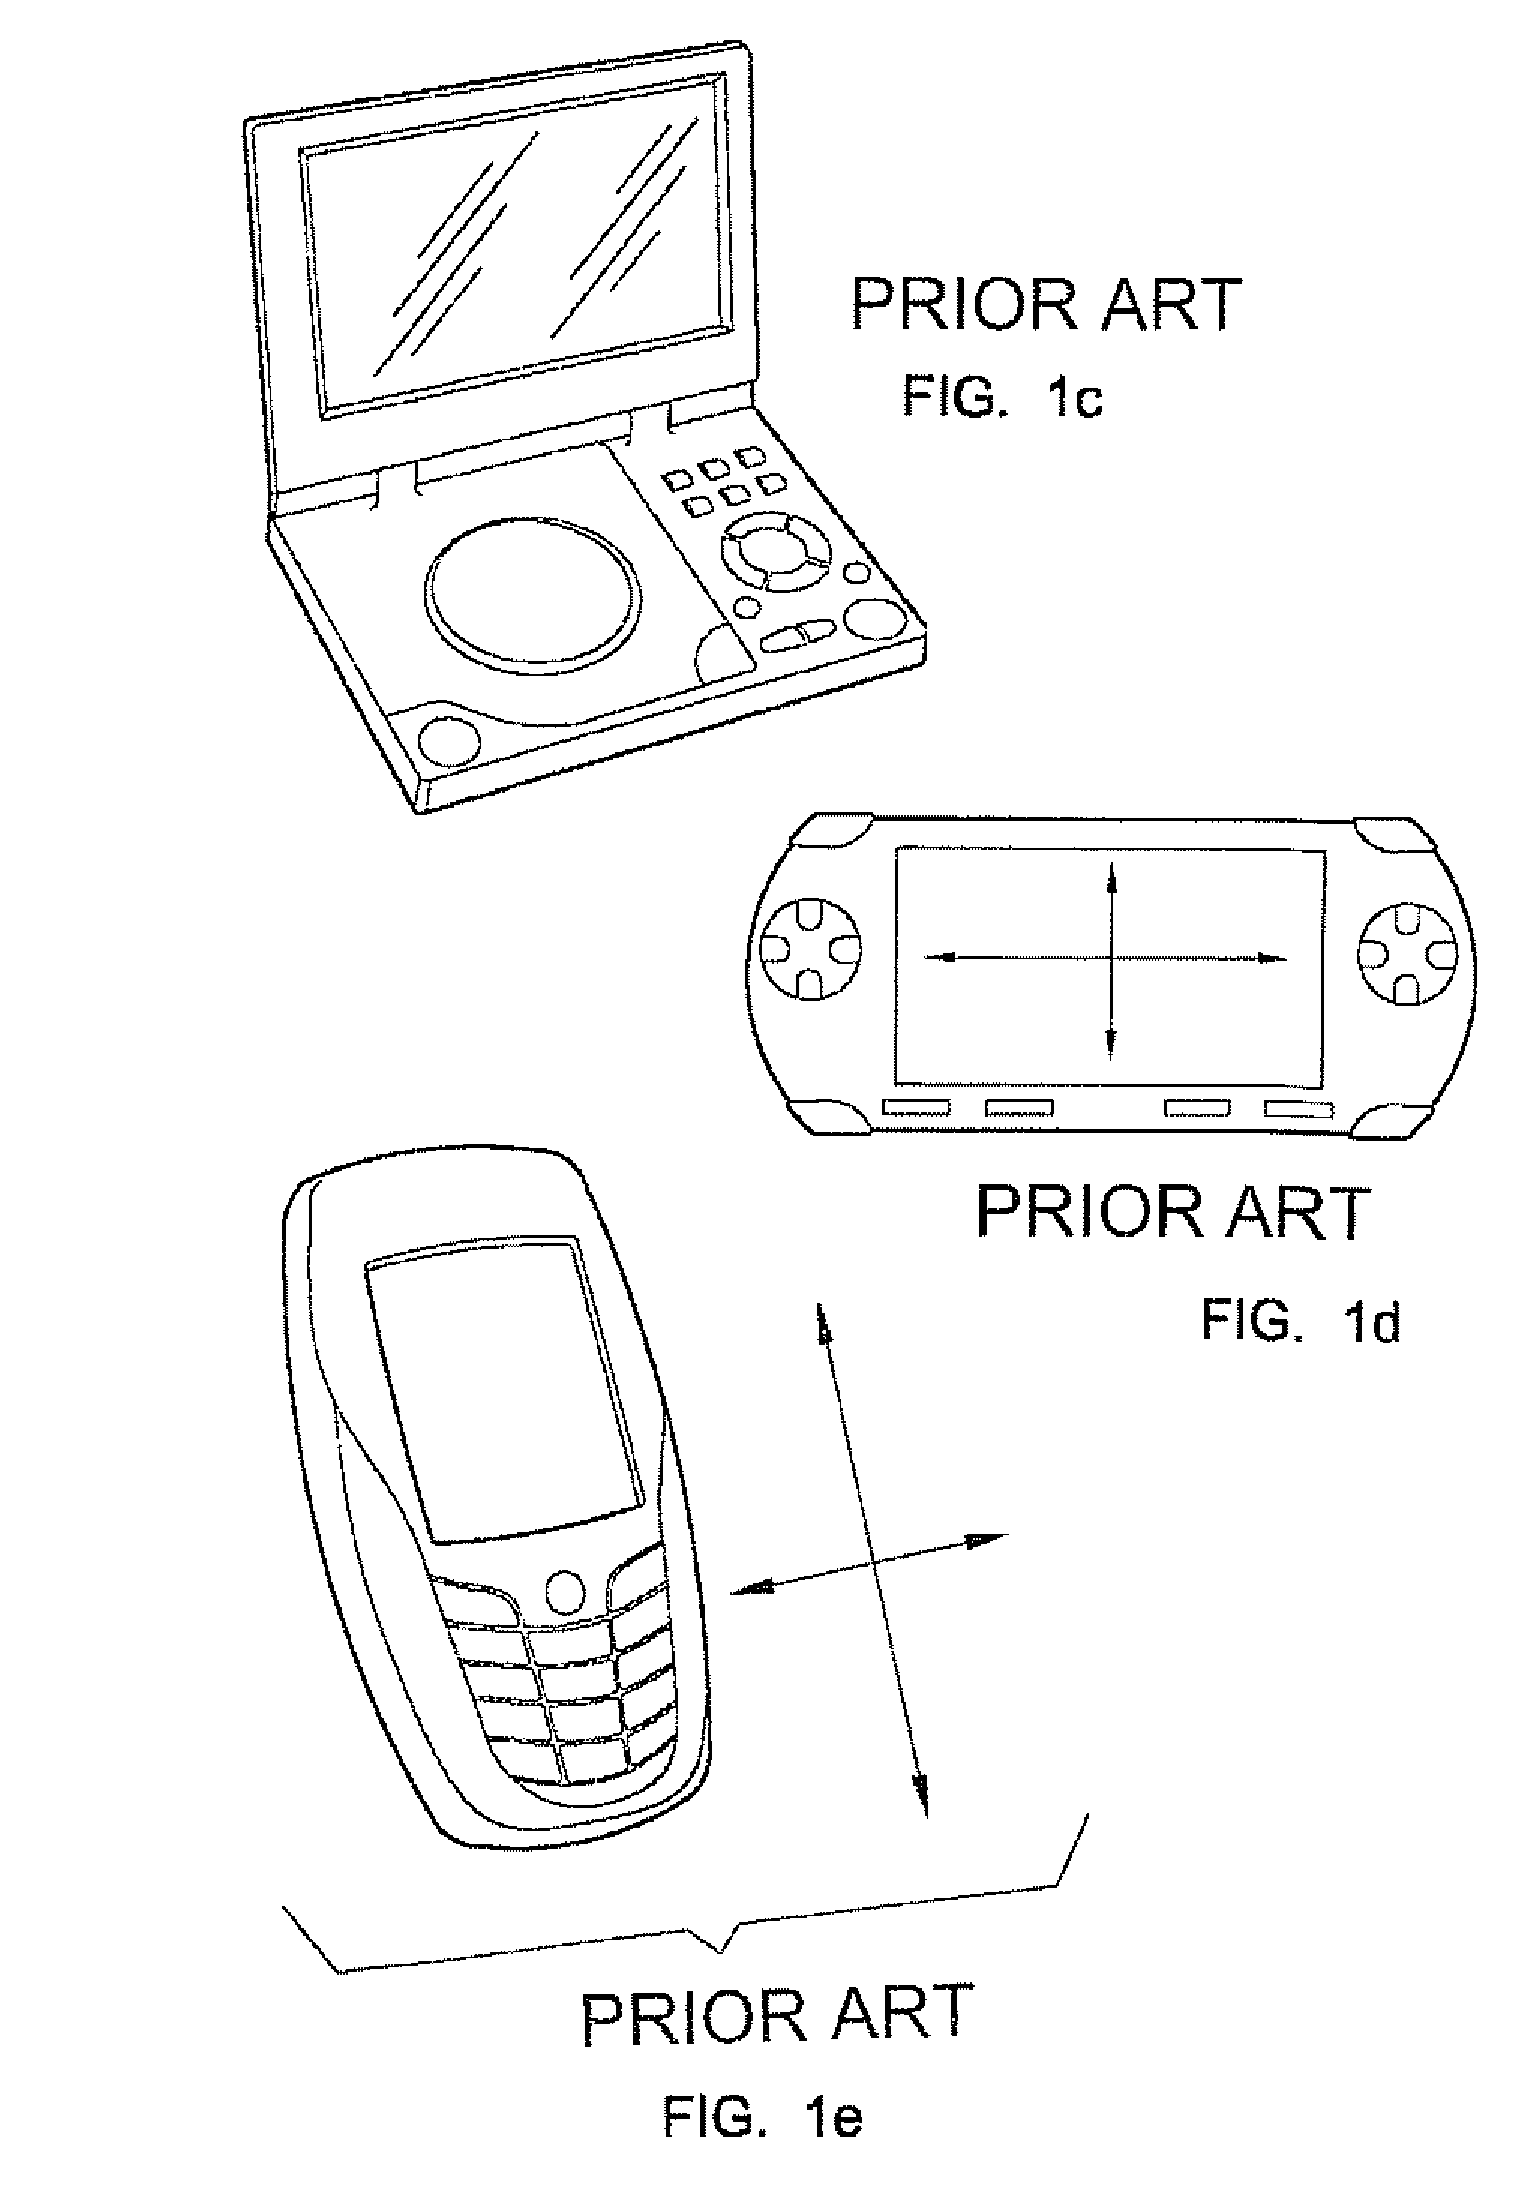 Device providing privacy and shade for a display